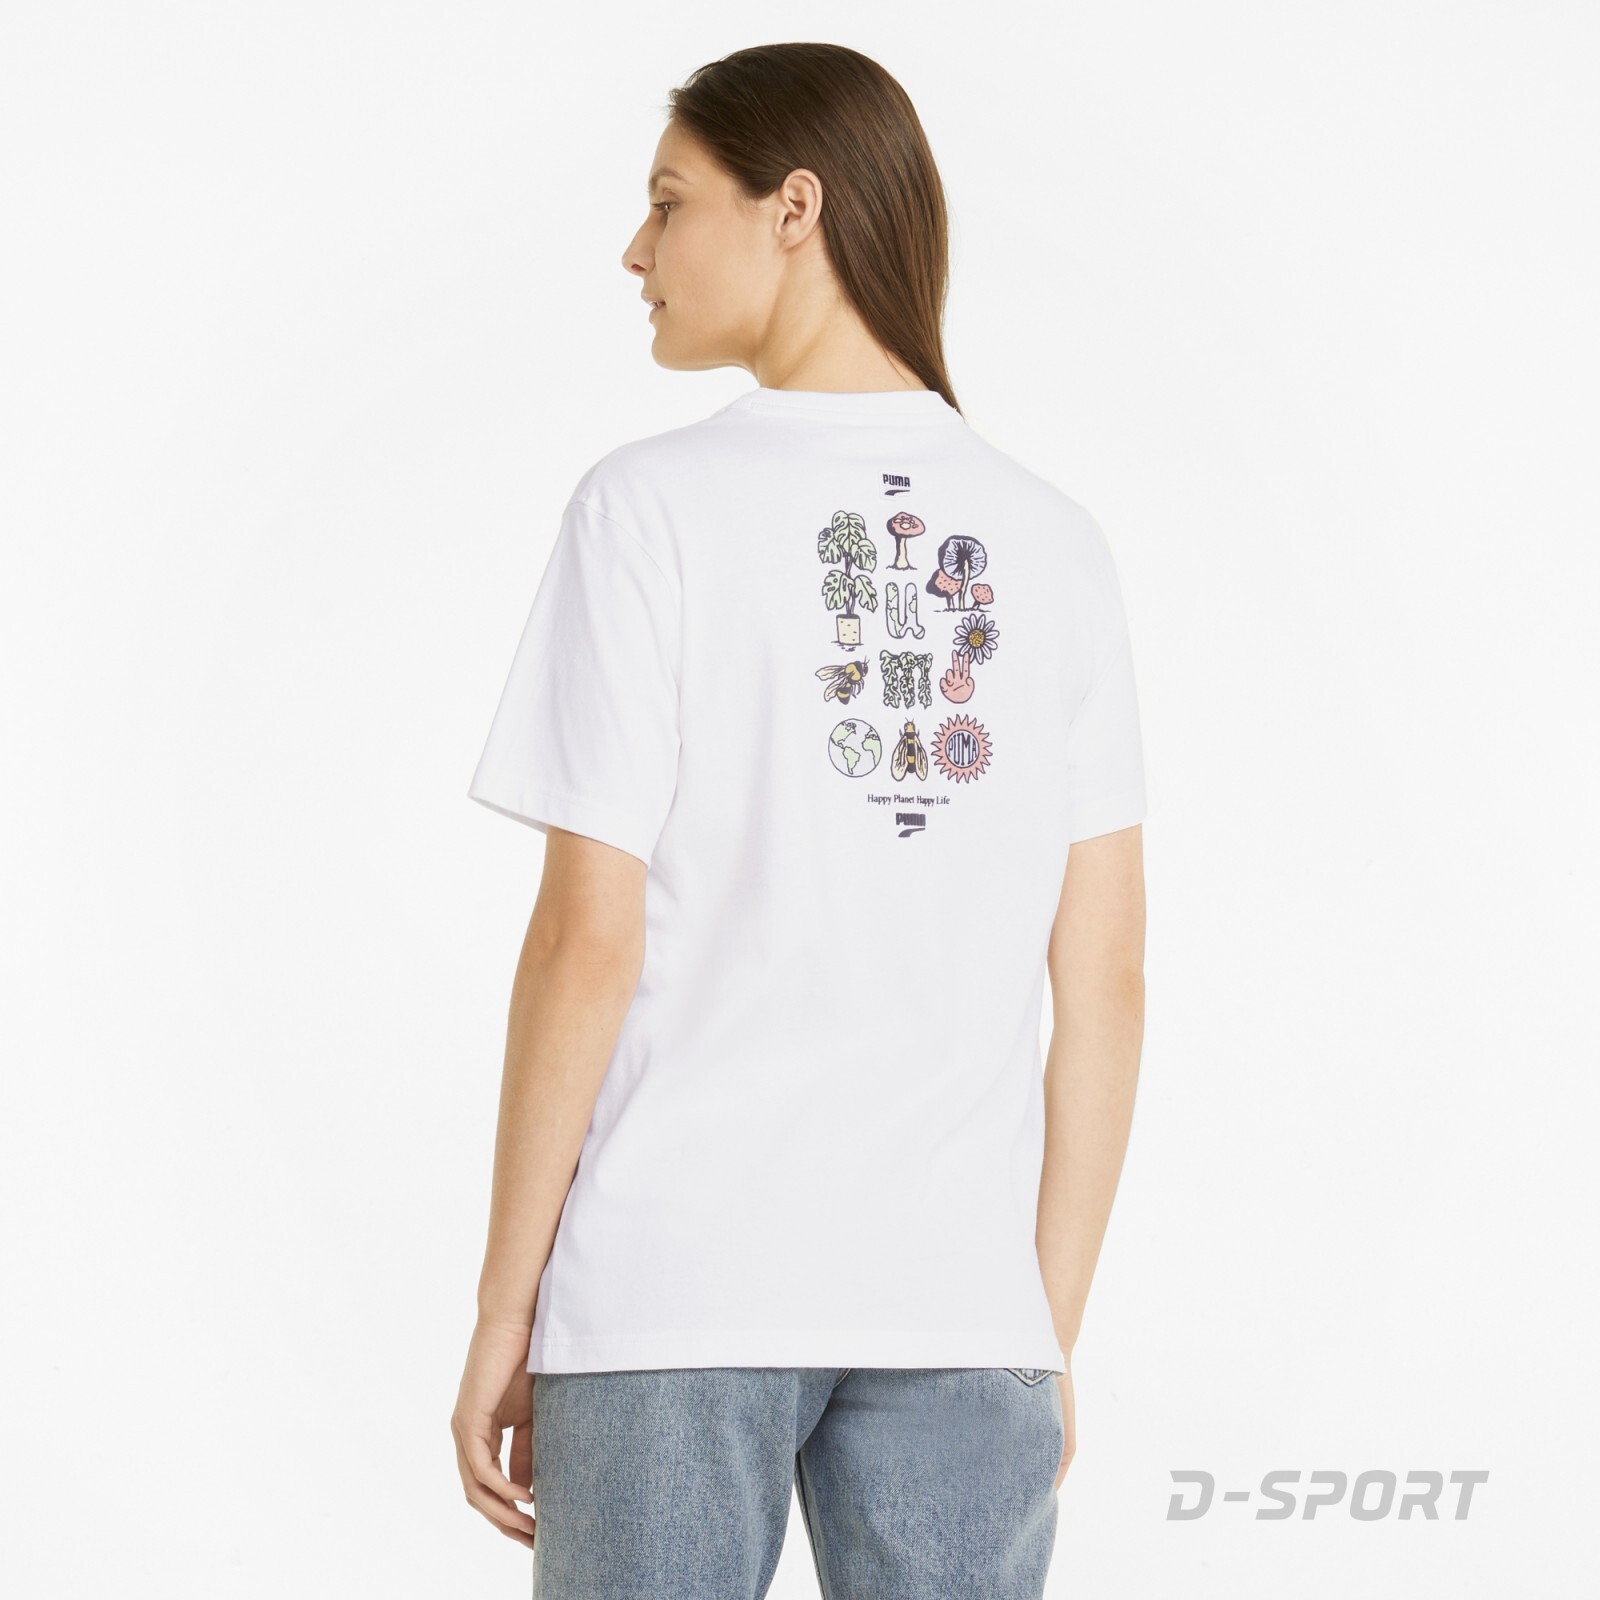 Downtown Relaxed Graphic Tee Puma White